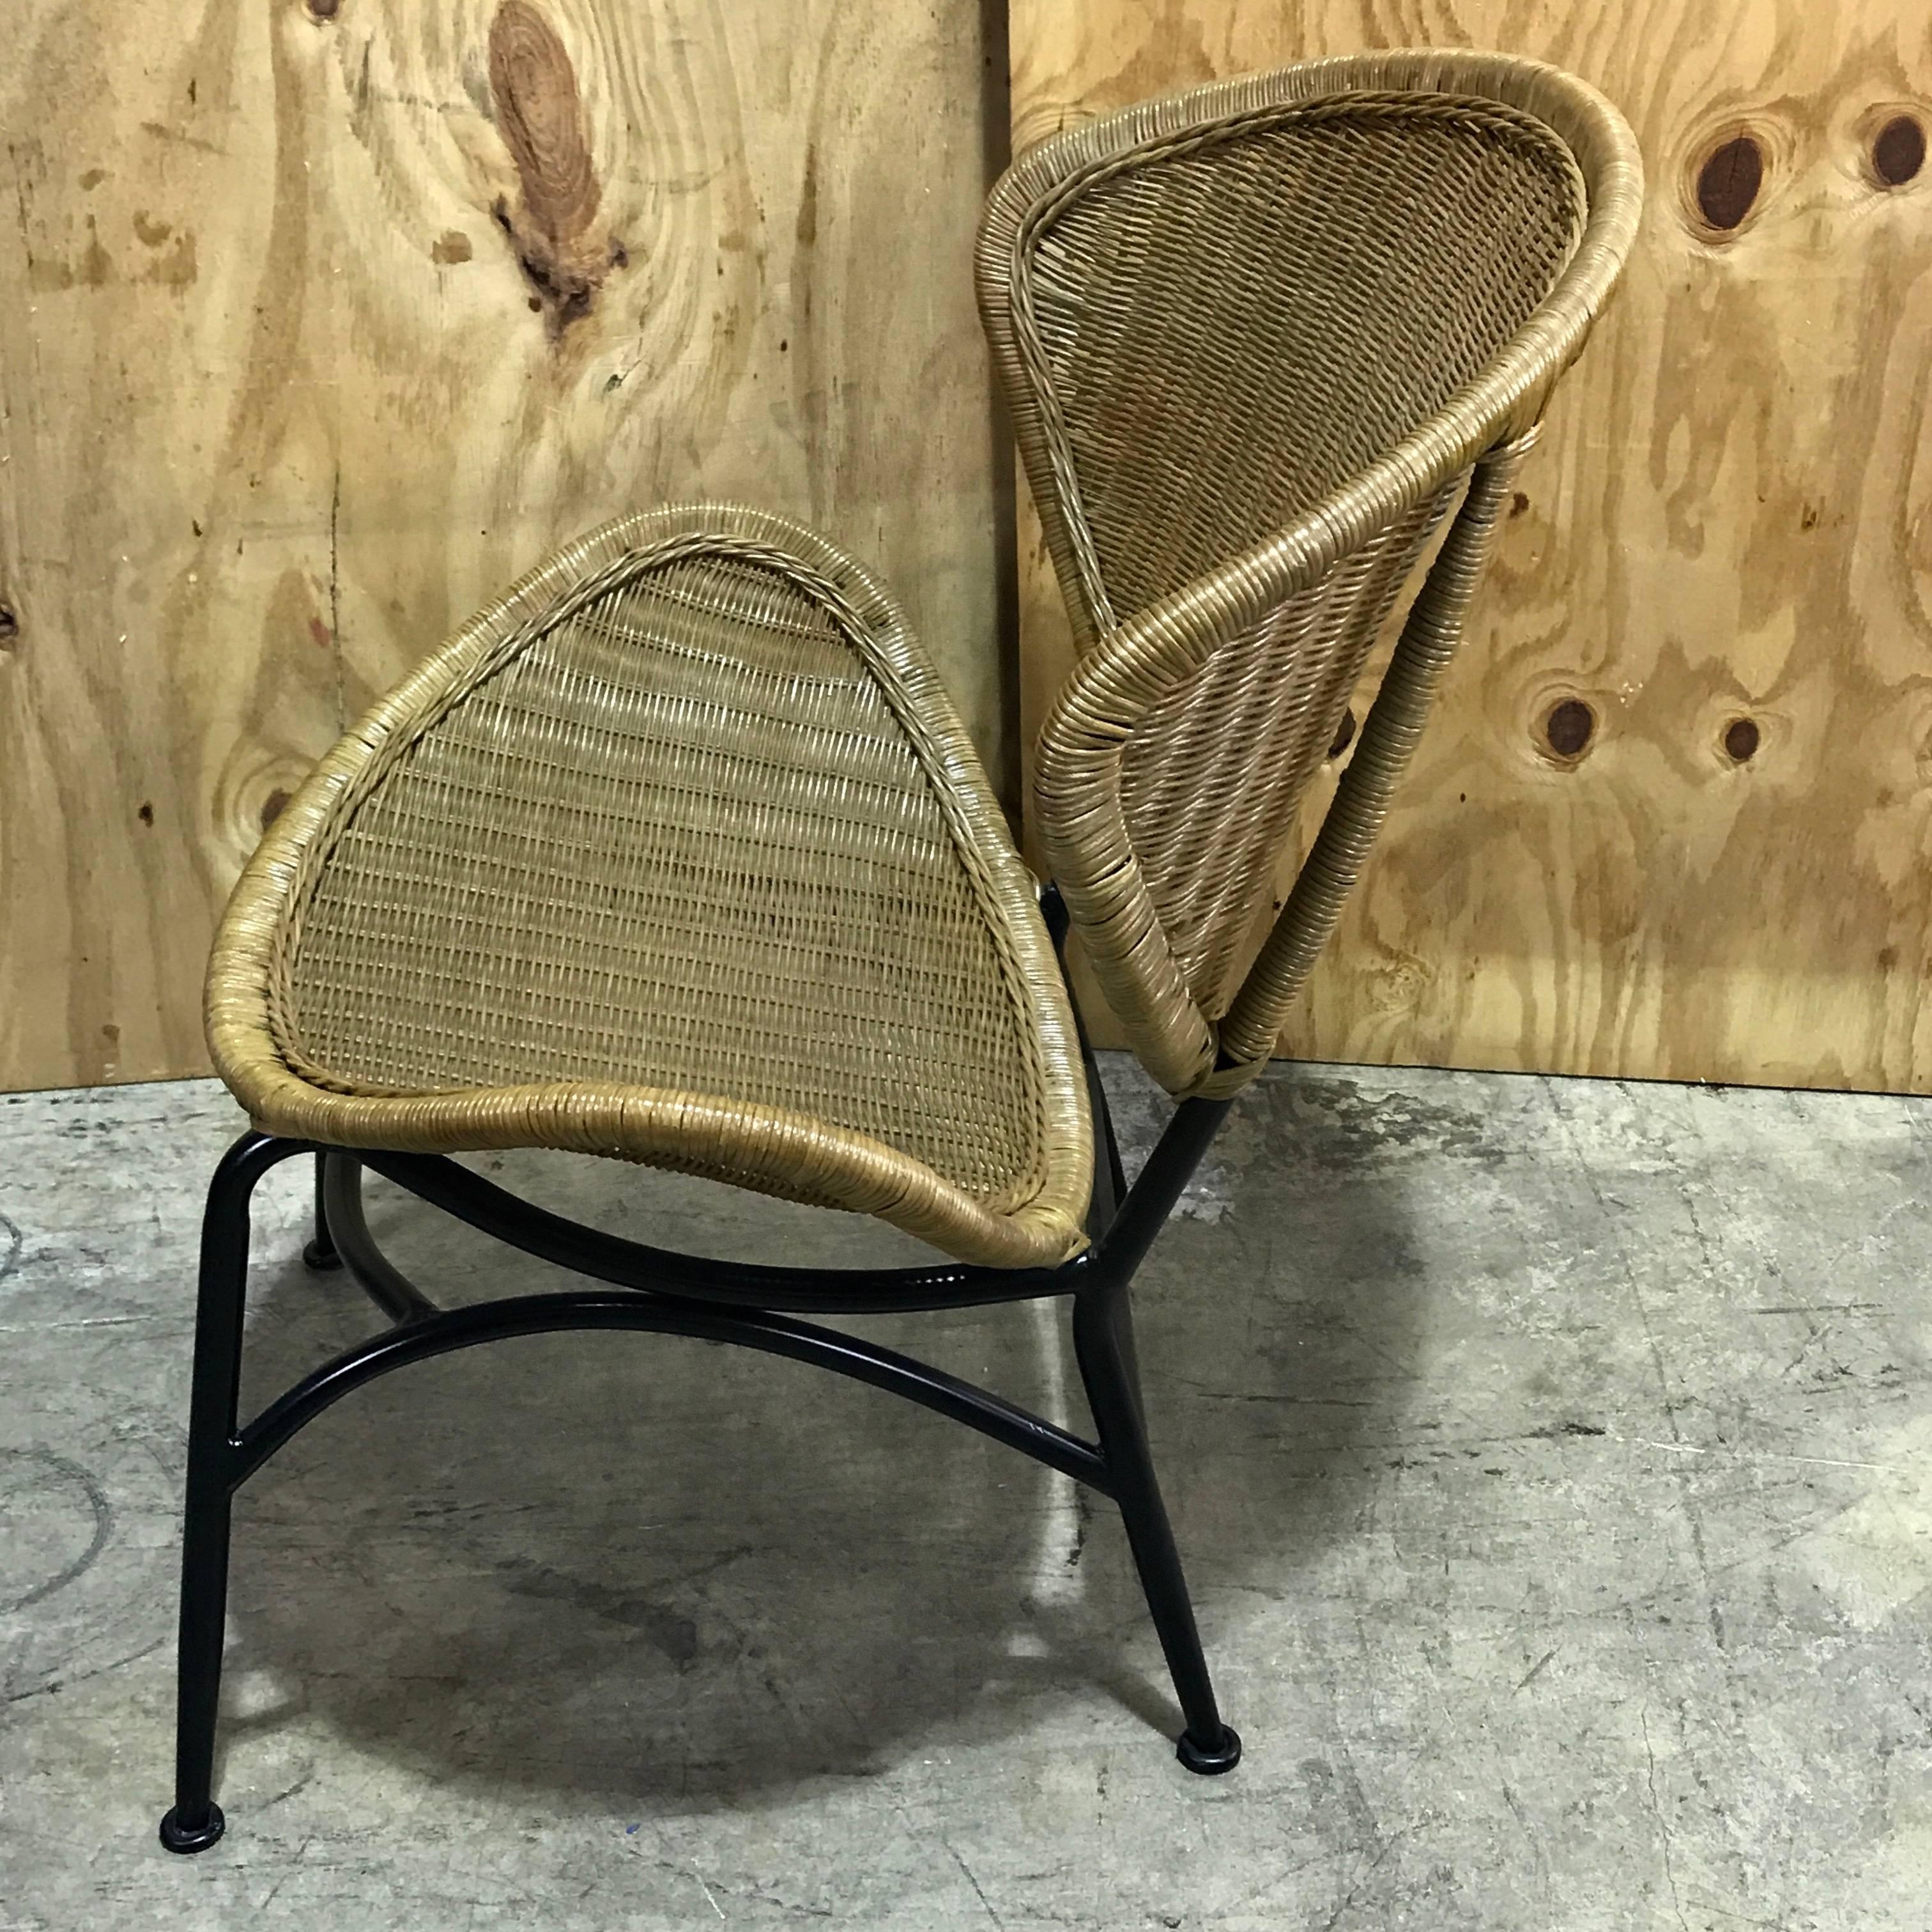 Willow Pair of Midcentury Crescent Shaped Wicker Lounge Chairs, Restored